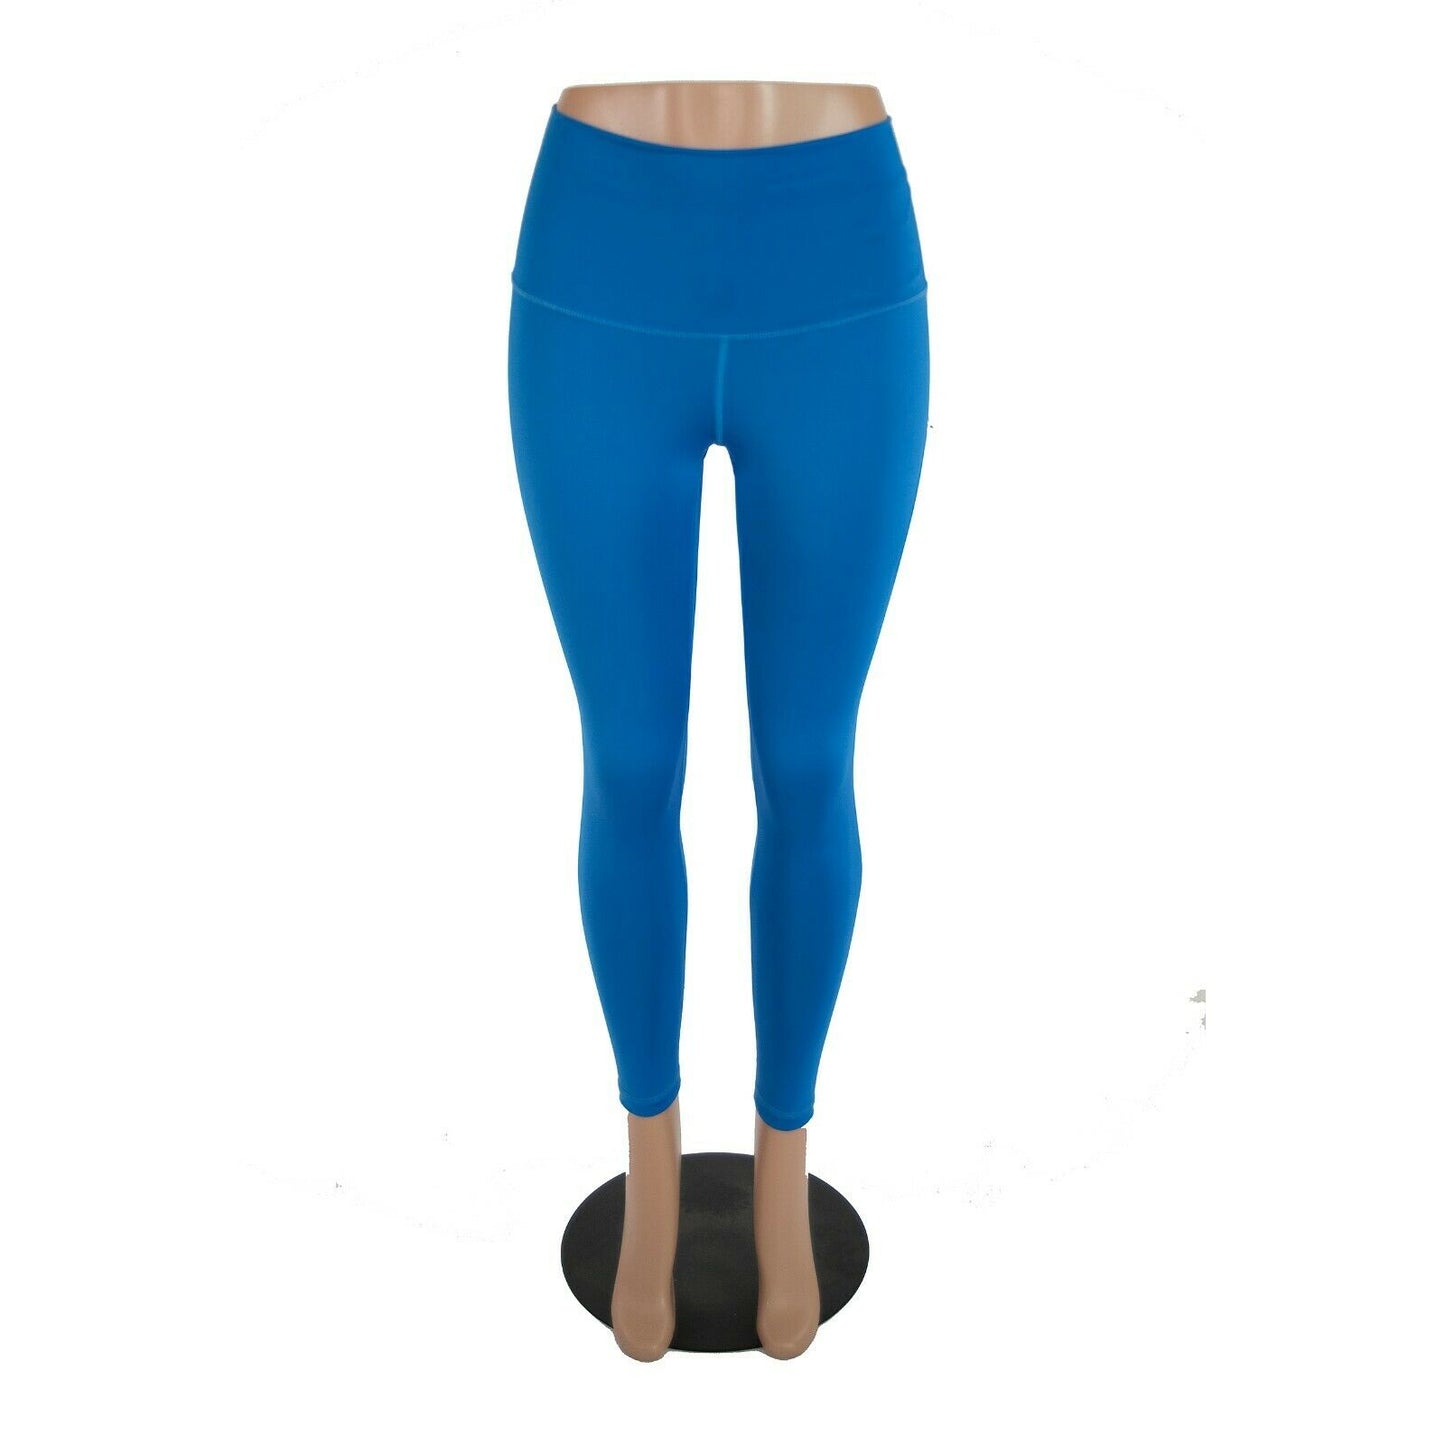 Lululemon Royal Blue Fast Free 7/8 Tight II Fitted Leggings NWT Size 6